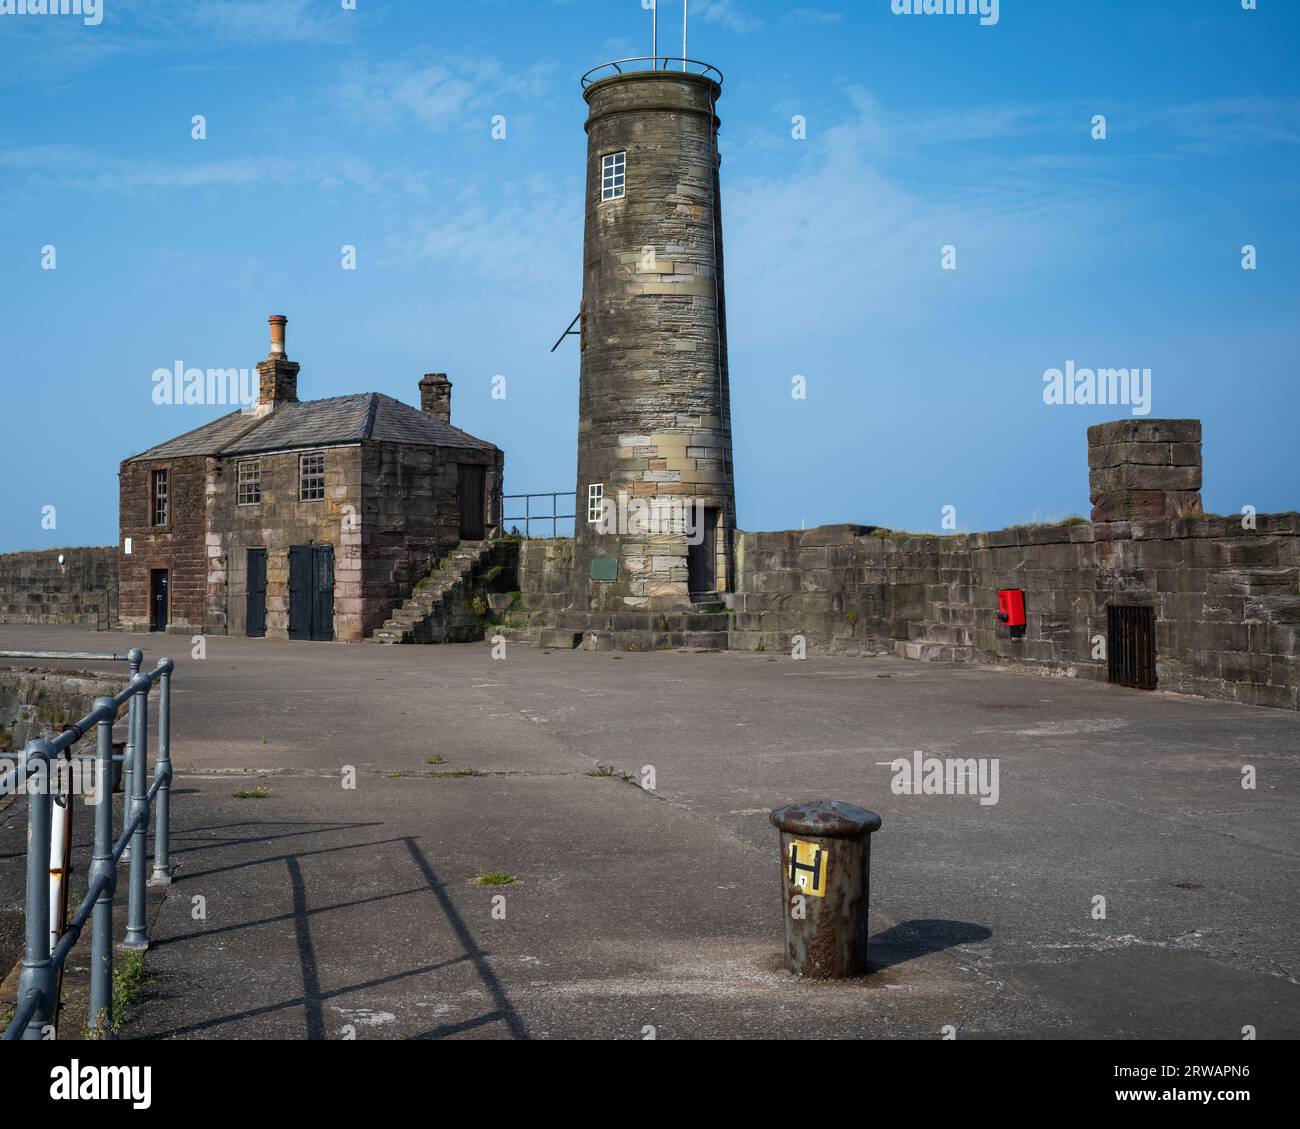 The historic 18th century watch tower and pier masters watch house on the Old Quay at Whitehaven, West Cumbria, UK Stock Photo